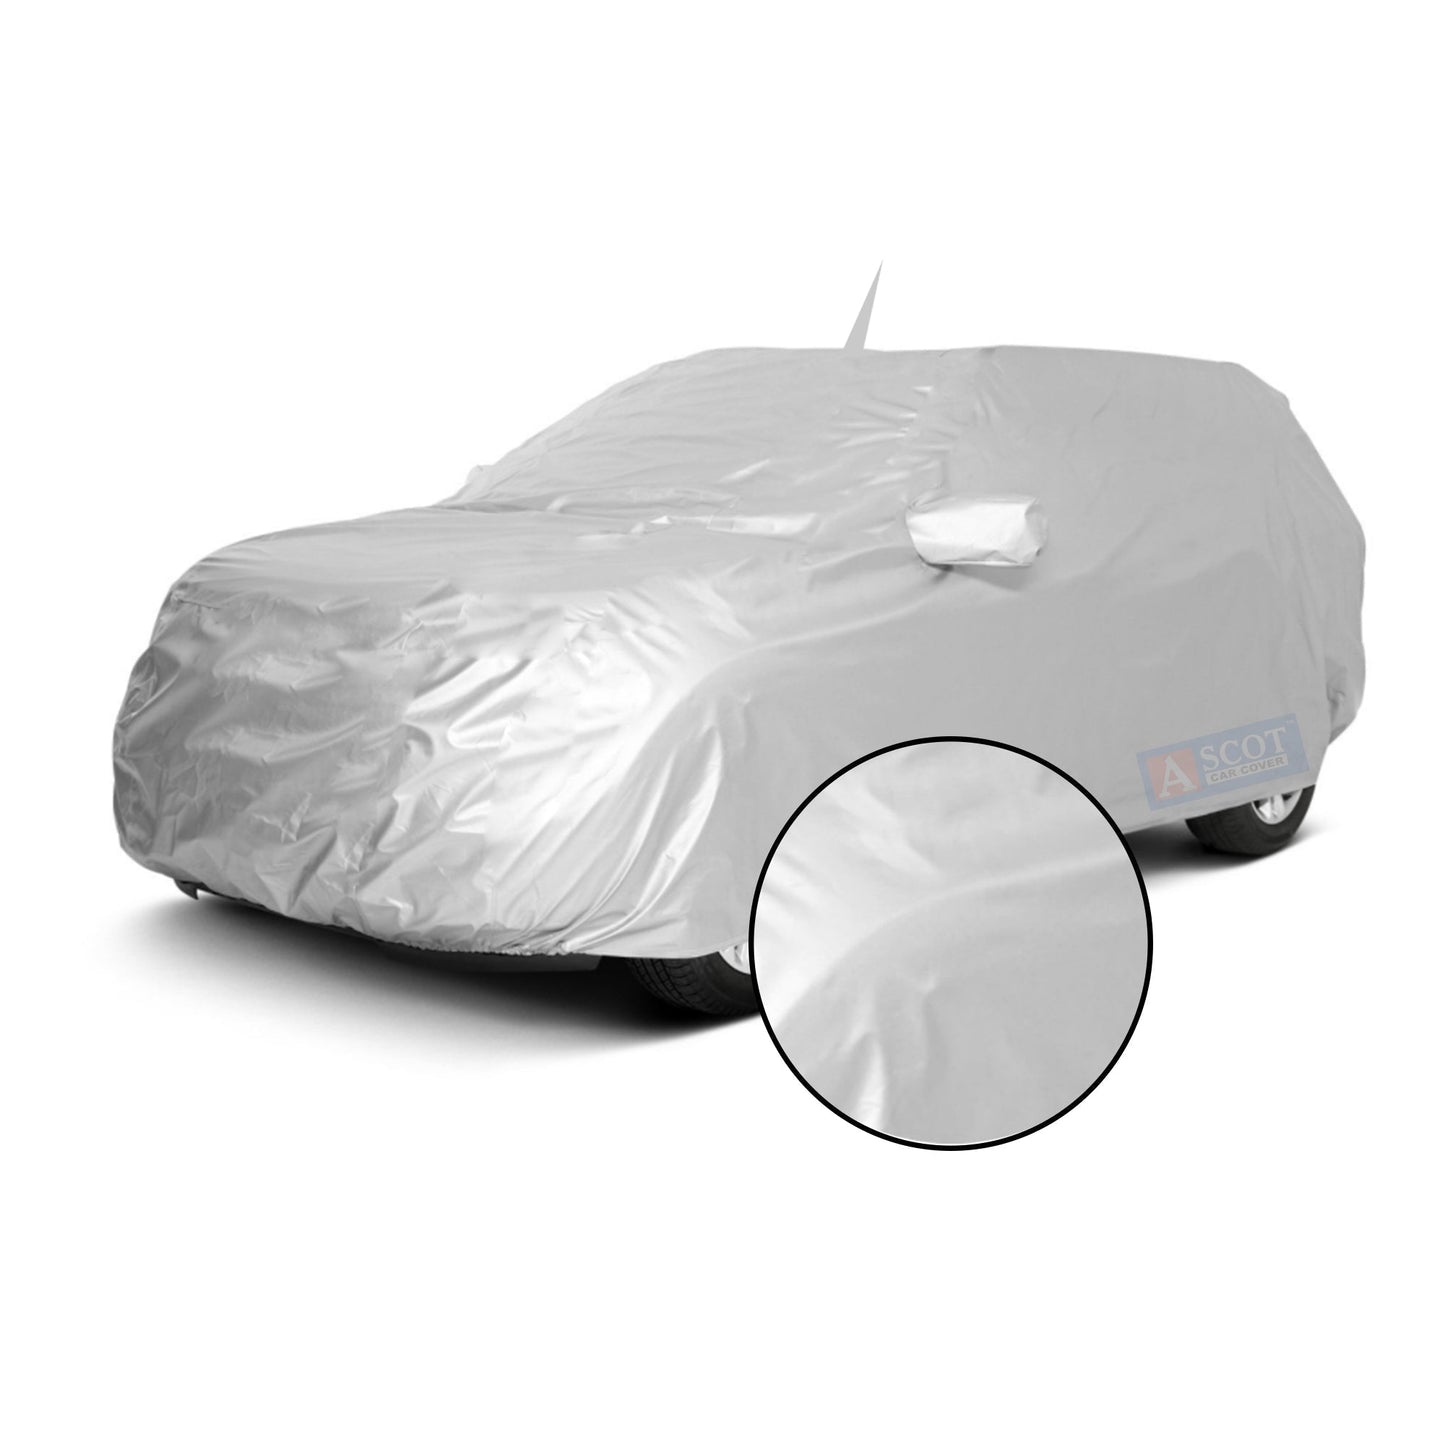 Ascot Maruti Xylo Car Body Cover Dust Proof, Trippel Stitched